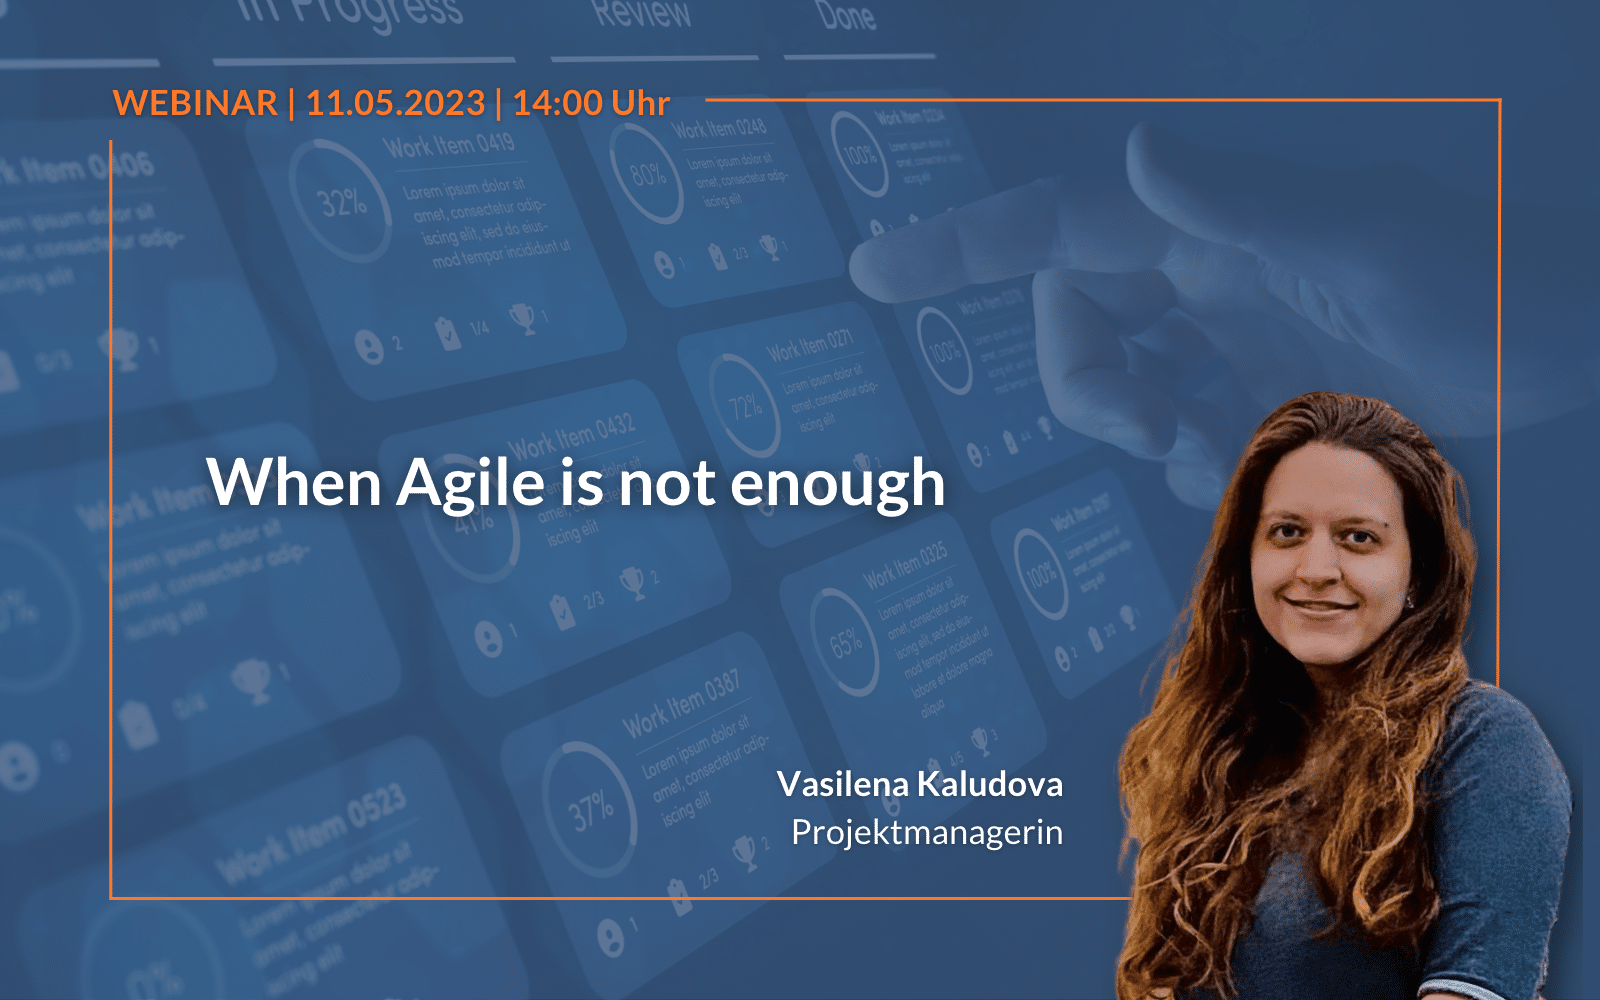 When Agile is not enough